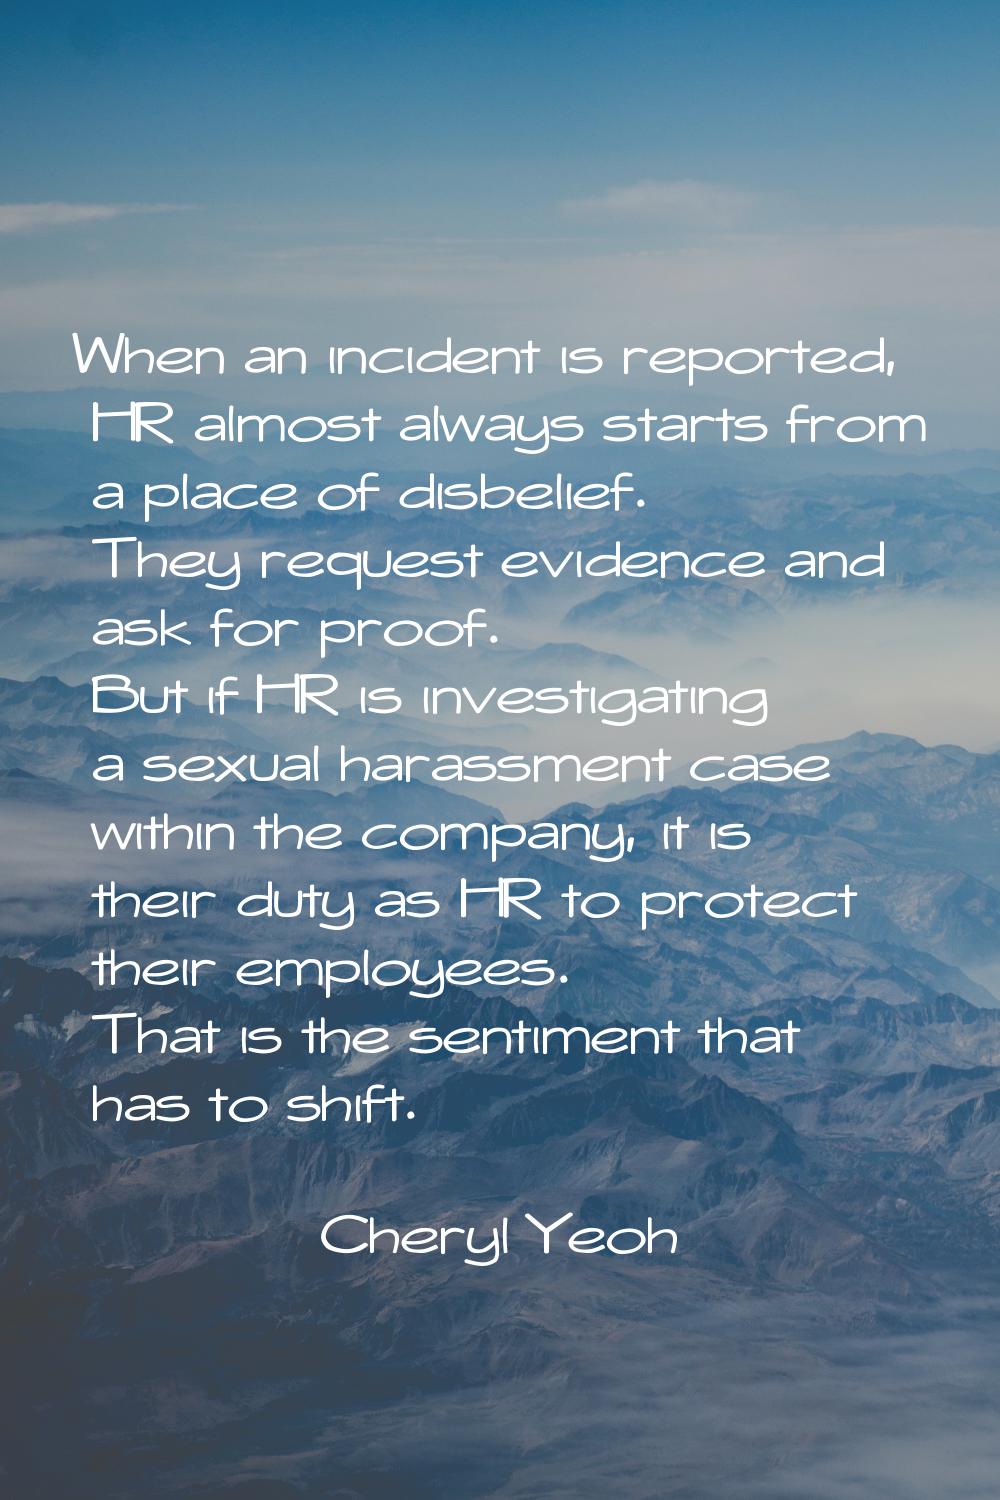 When an incident is reported, HR almost always starts from a place of disbelief. They request evide